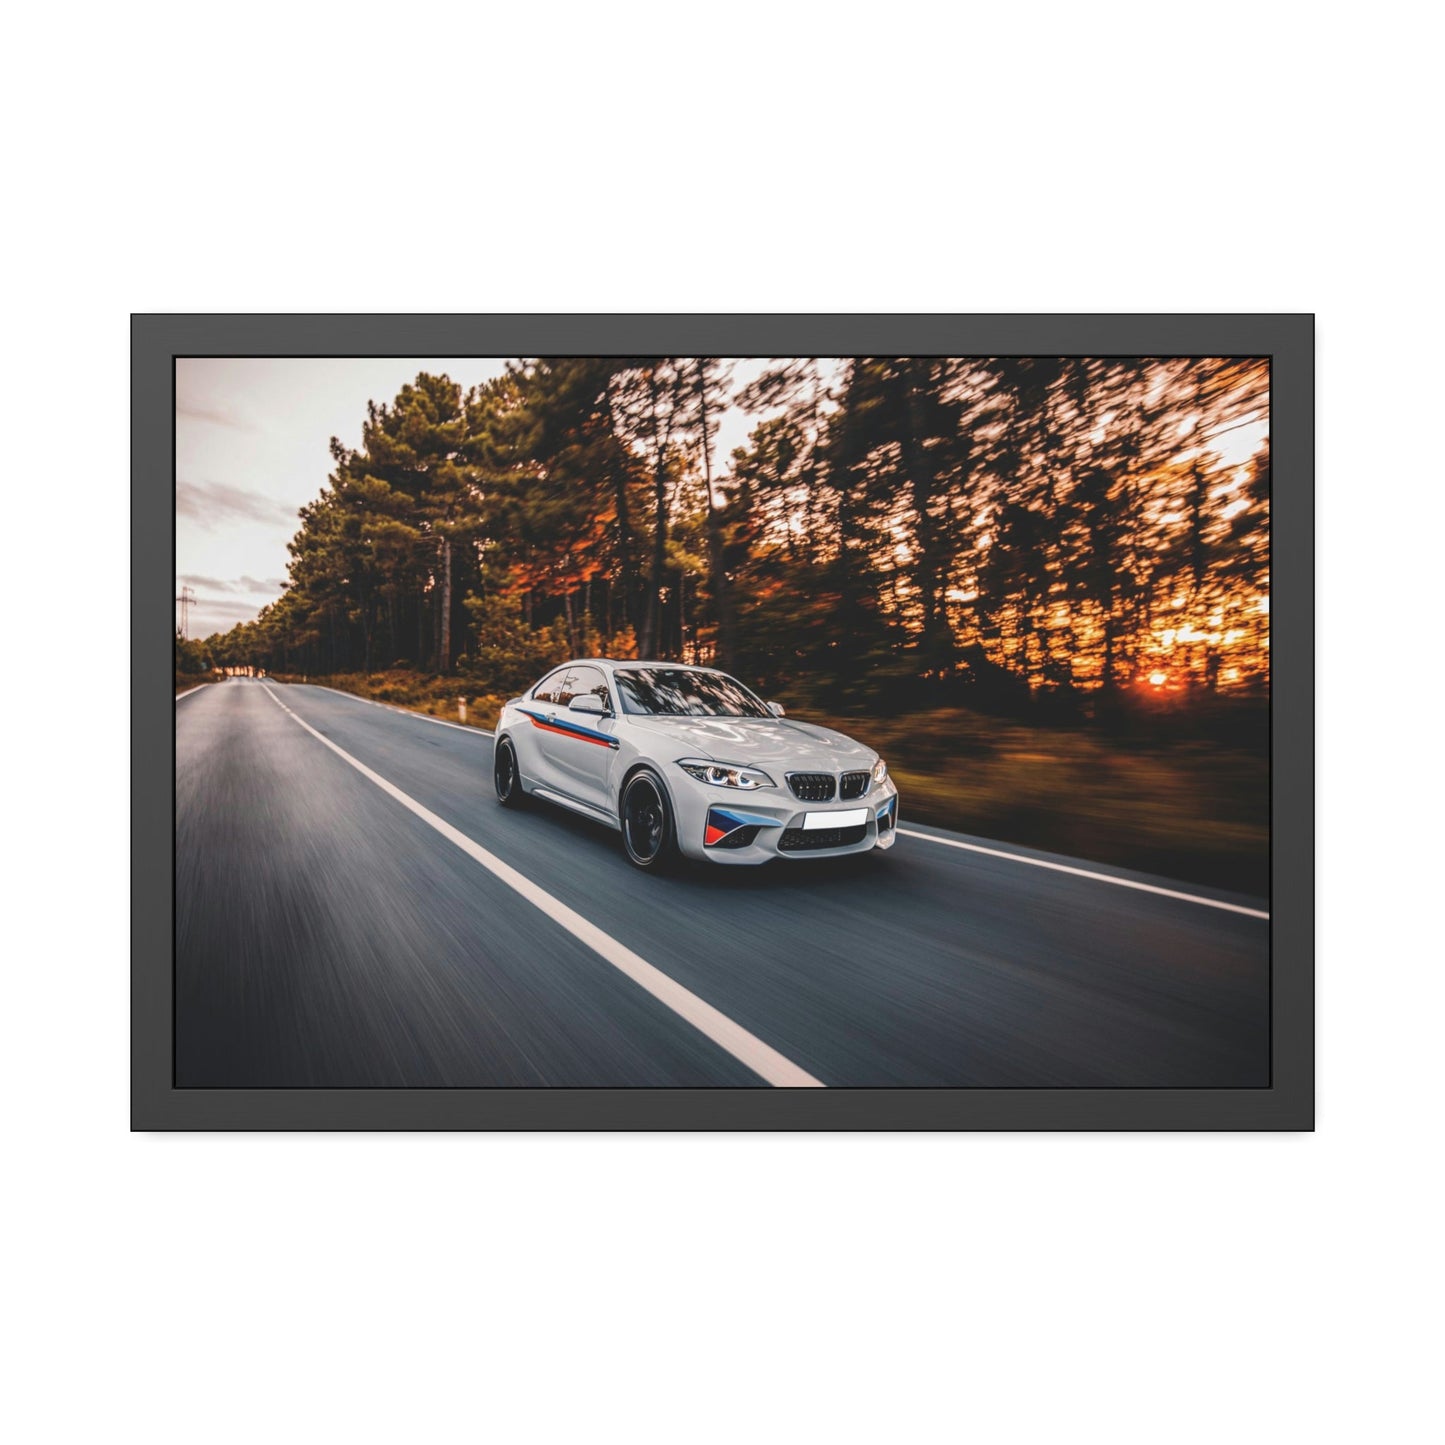 BMW Speed: Poster and Print on Canvas with Dynamic Car Art